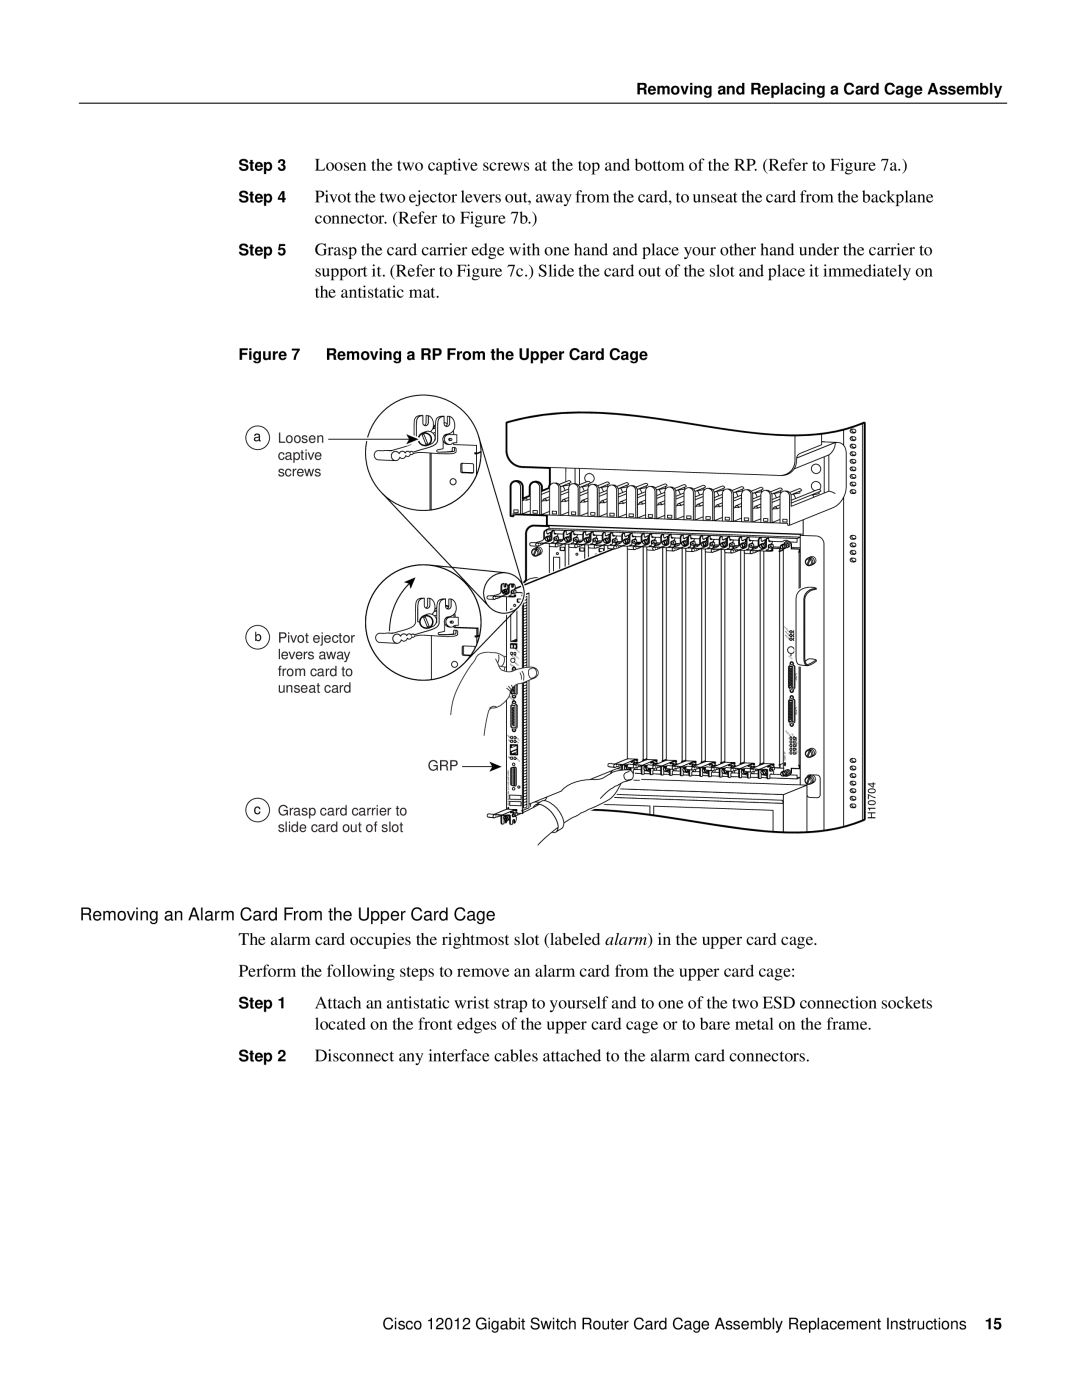 Cisco Systems 12012 manual Removing an Alarm Card From the Upper Card Cage 